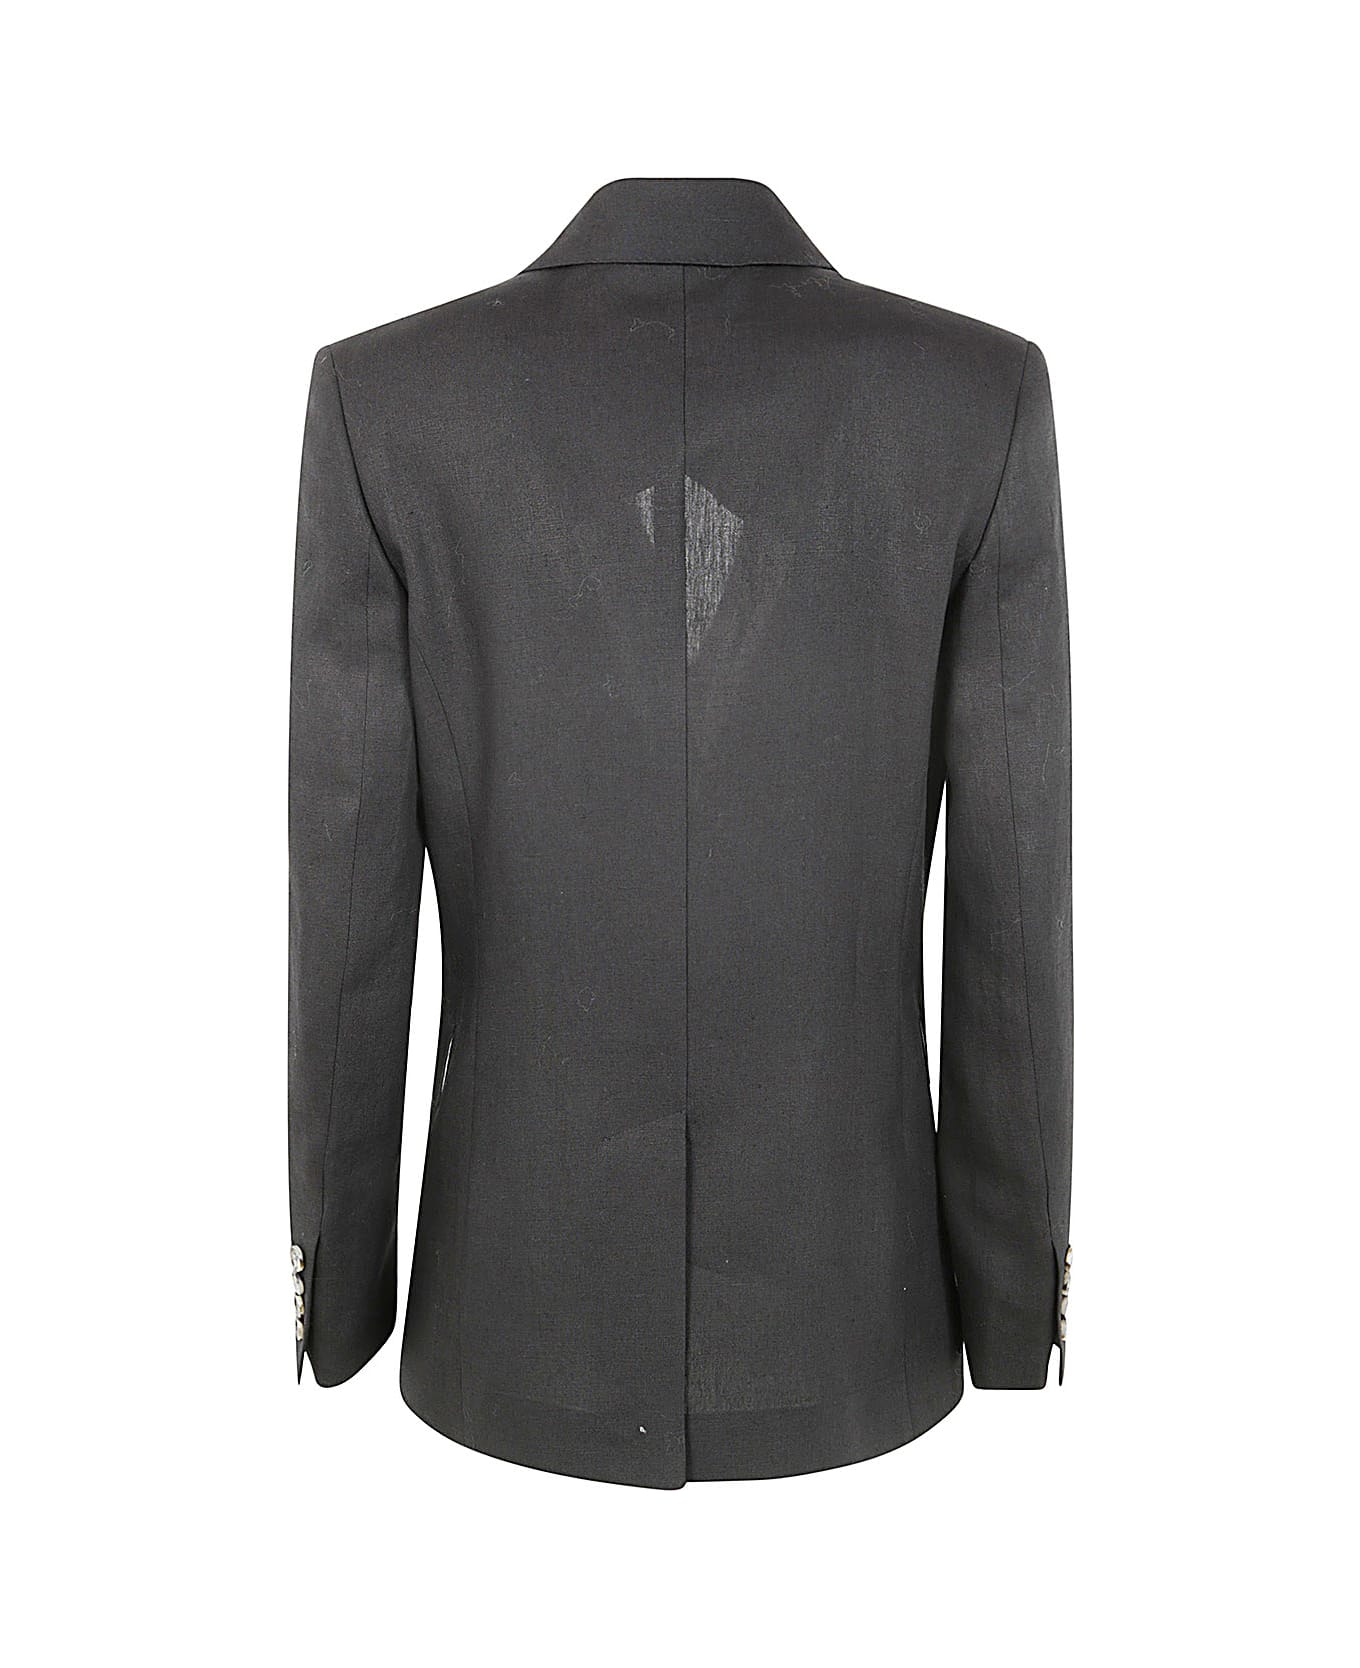 Paul Smith Double Breasted Jacket - Black コート